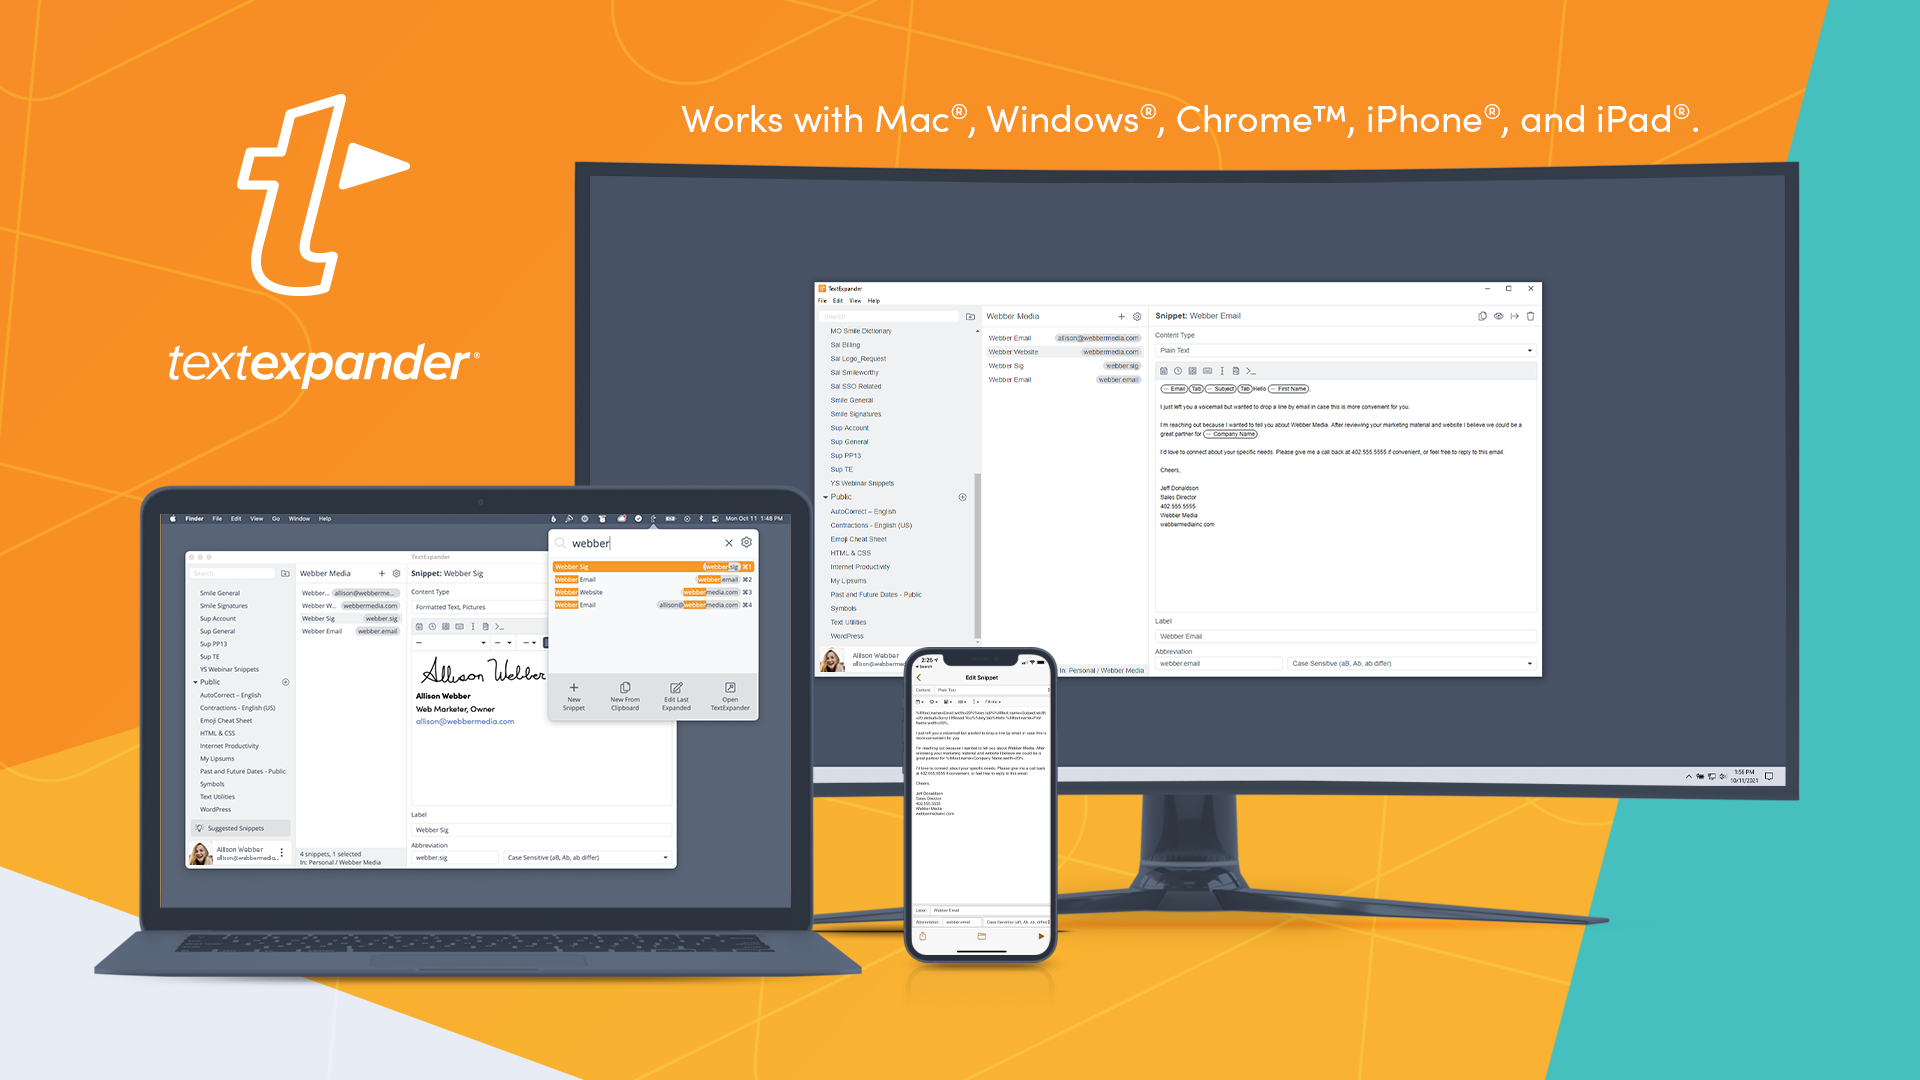 TextExpander works on all your devices, including desktop, mobile, and tablet.